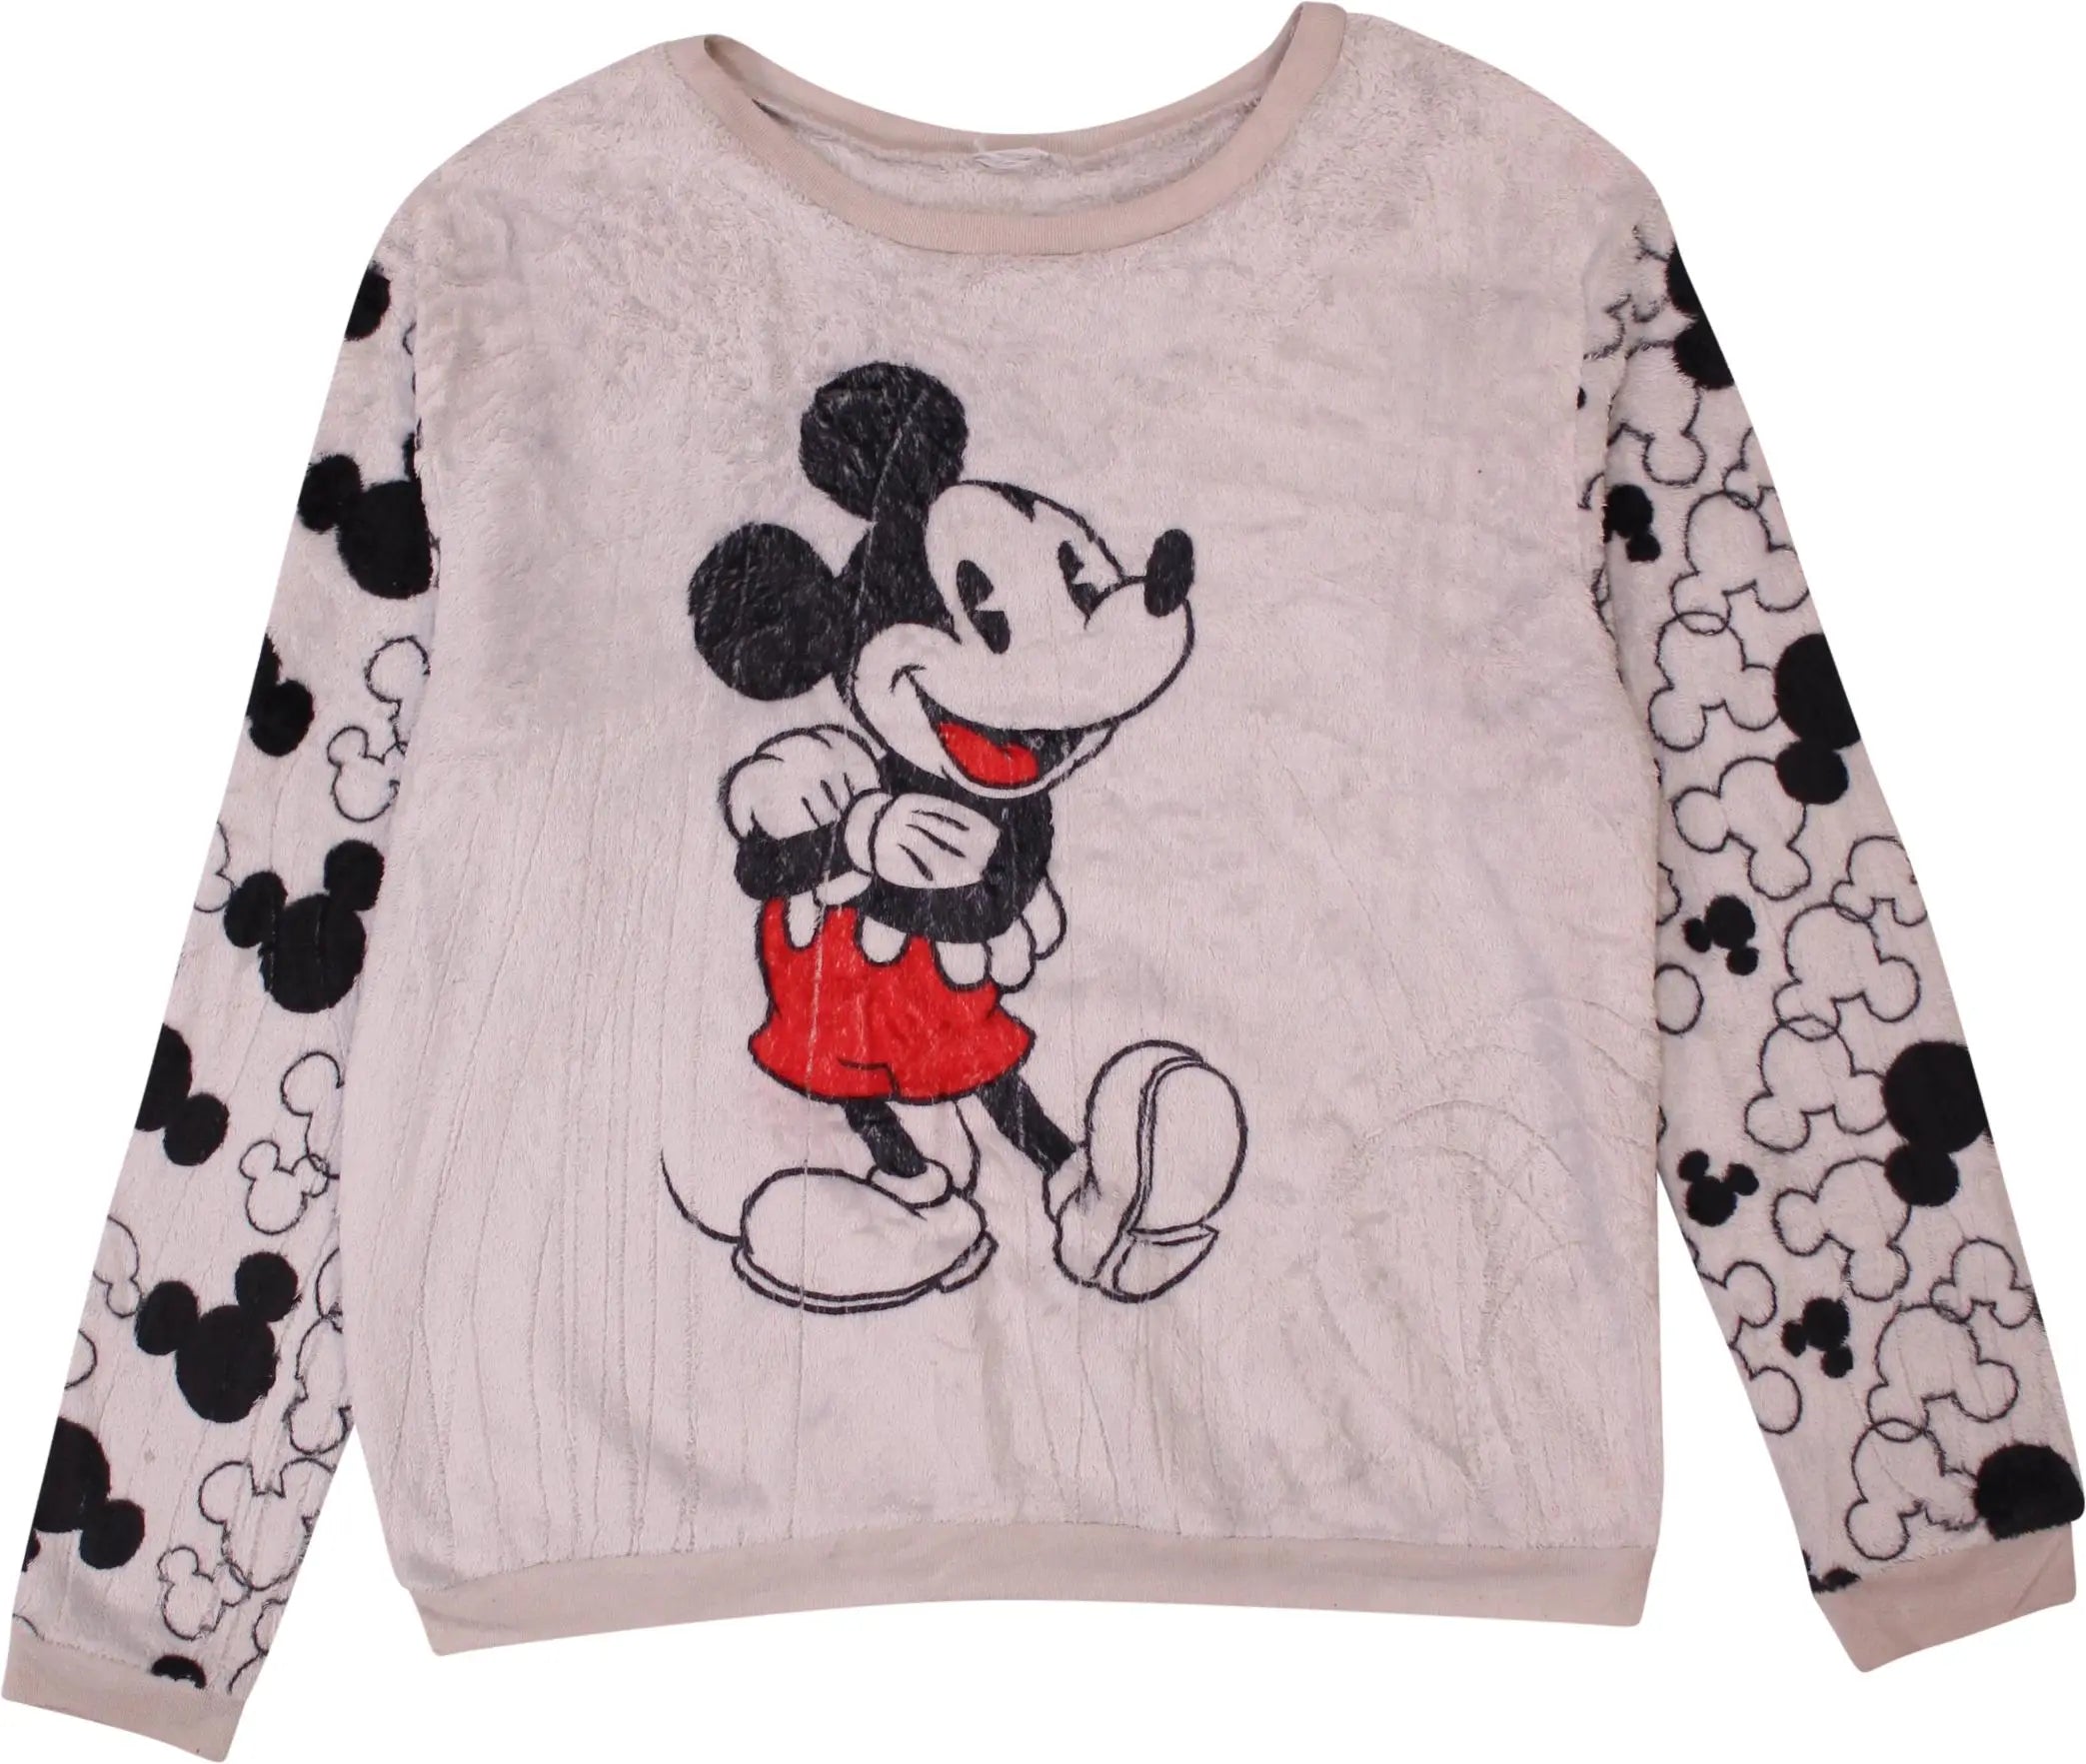 Unknown - Fluffy Mickey Mouse Sweatshirt- ThriftTale.com - Vintage and second handclothing